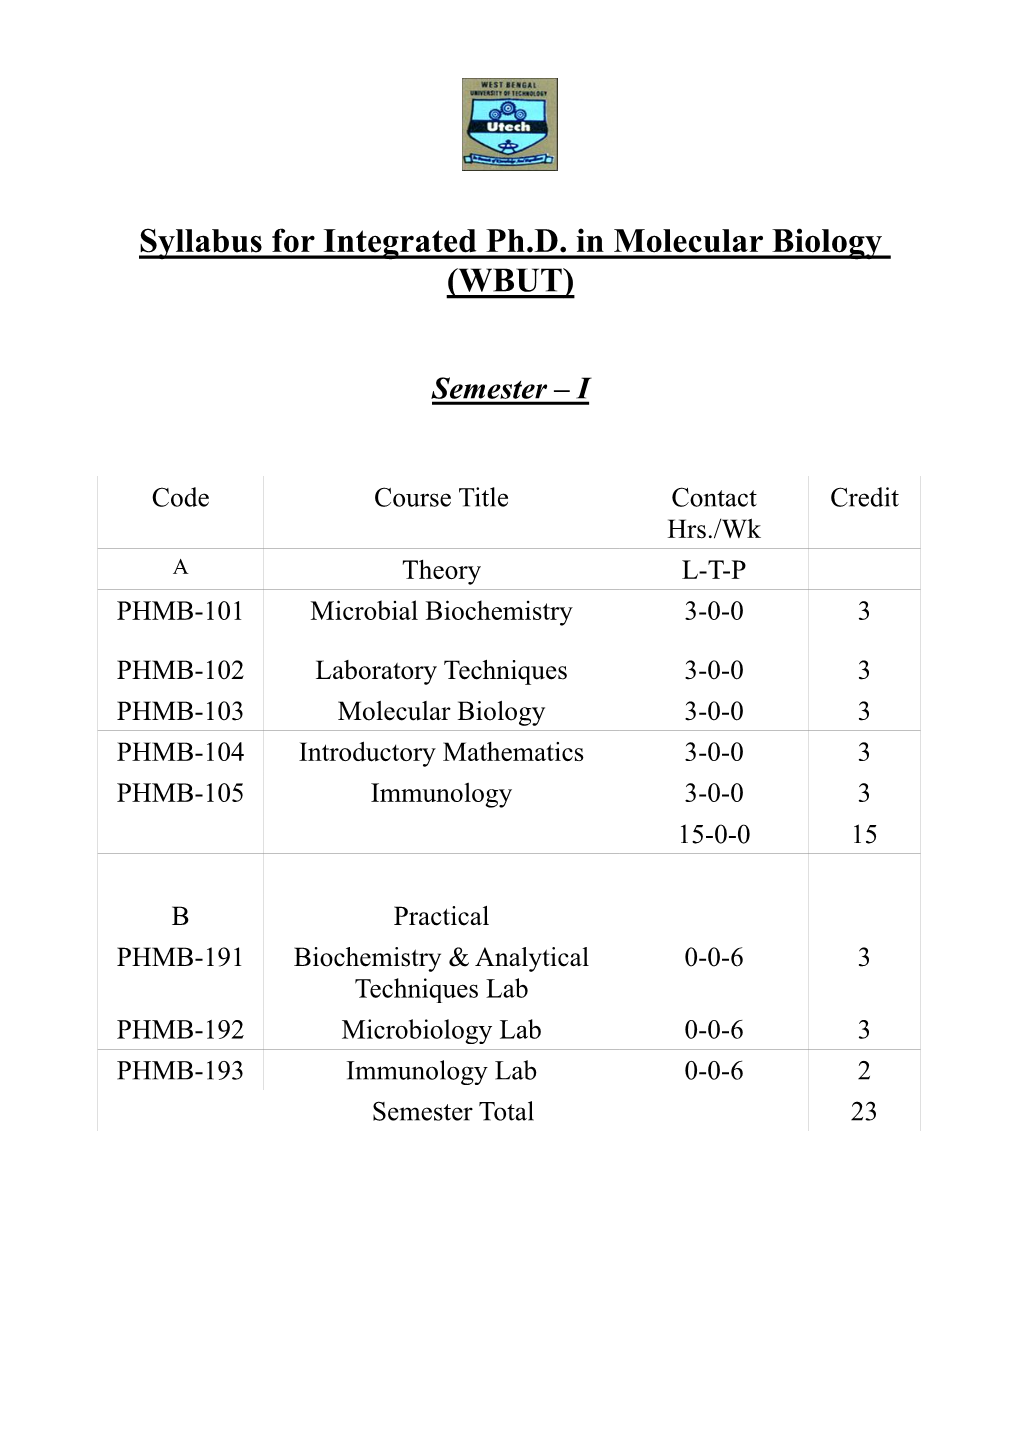 Syllabus for Integrated Ph.D. in Molecular Biology (WBUT)